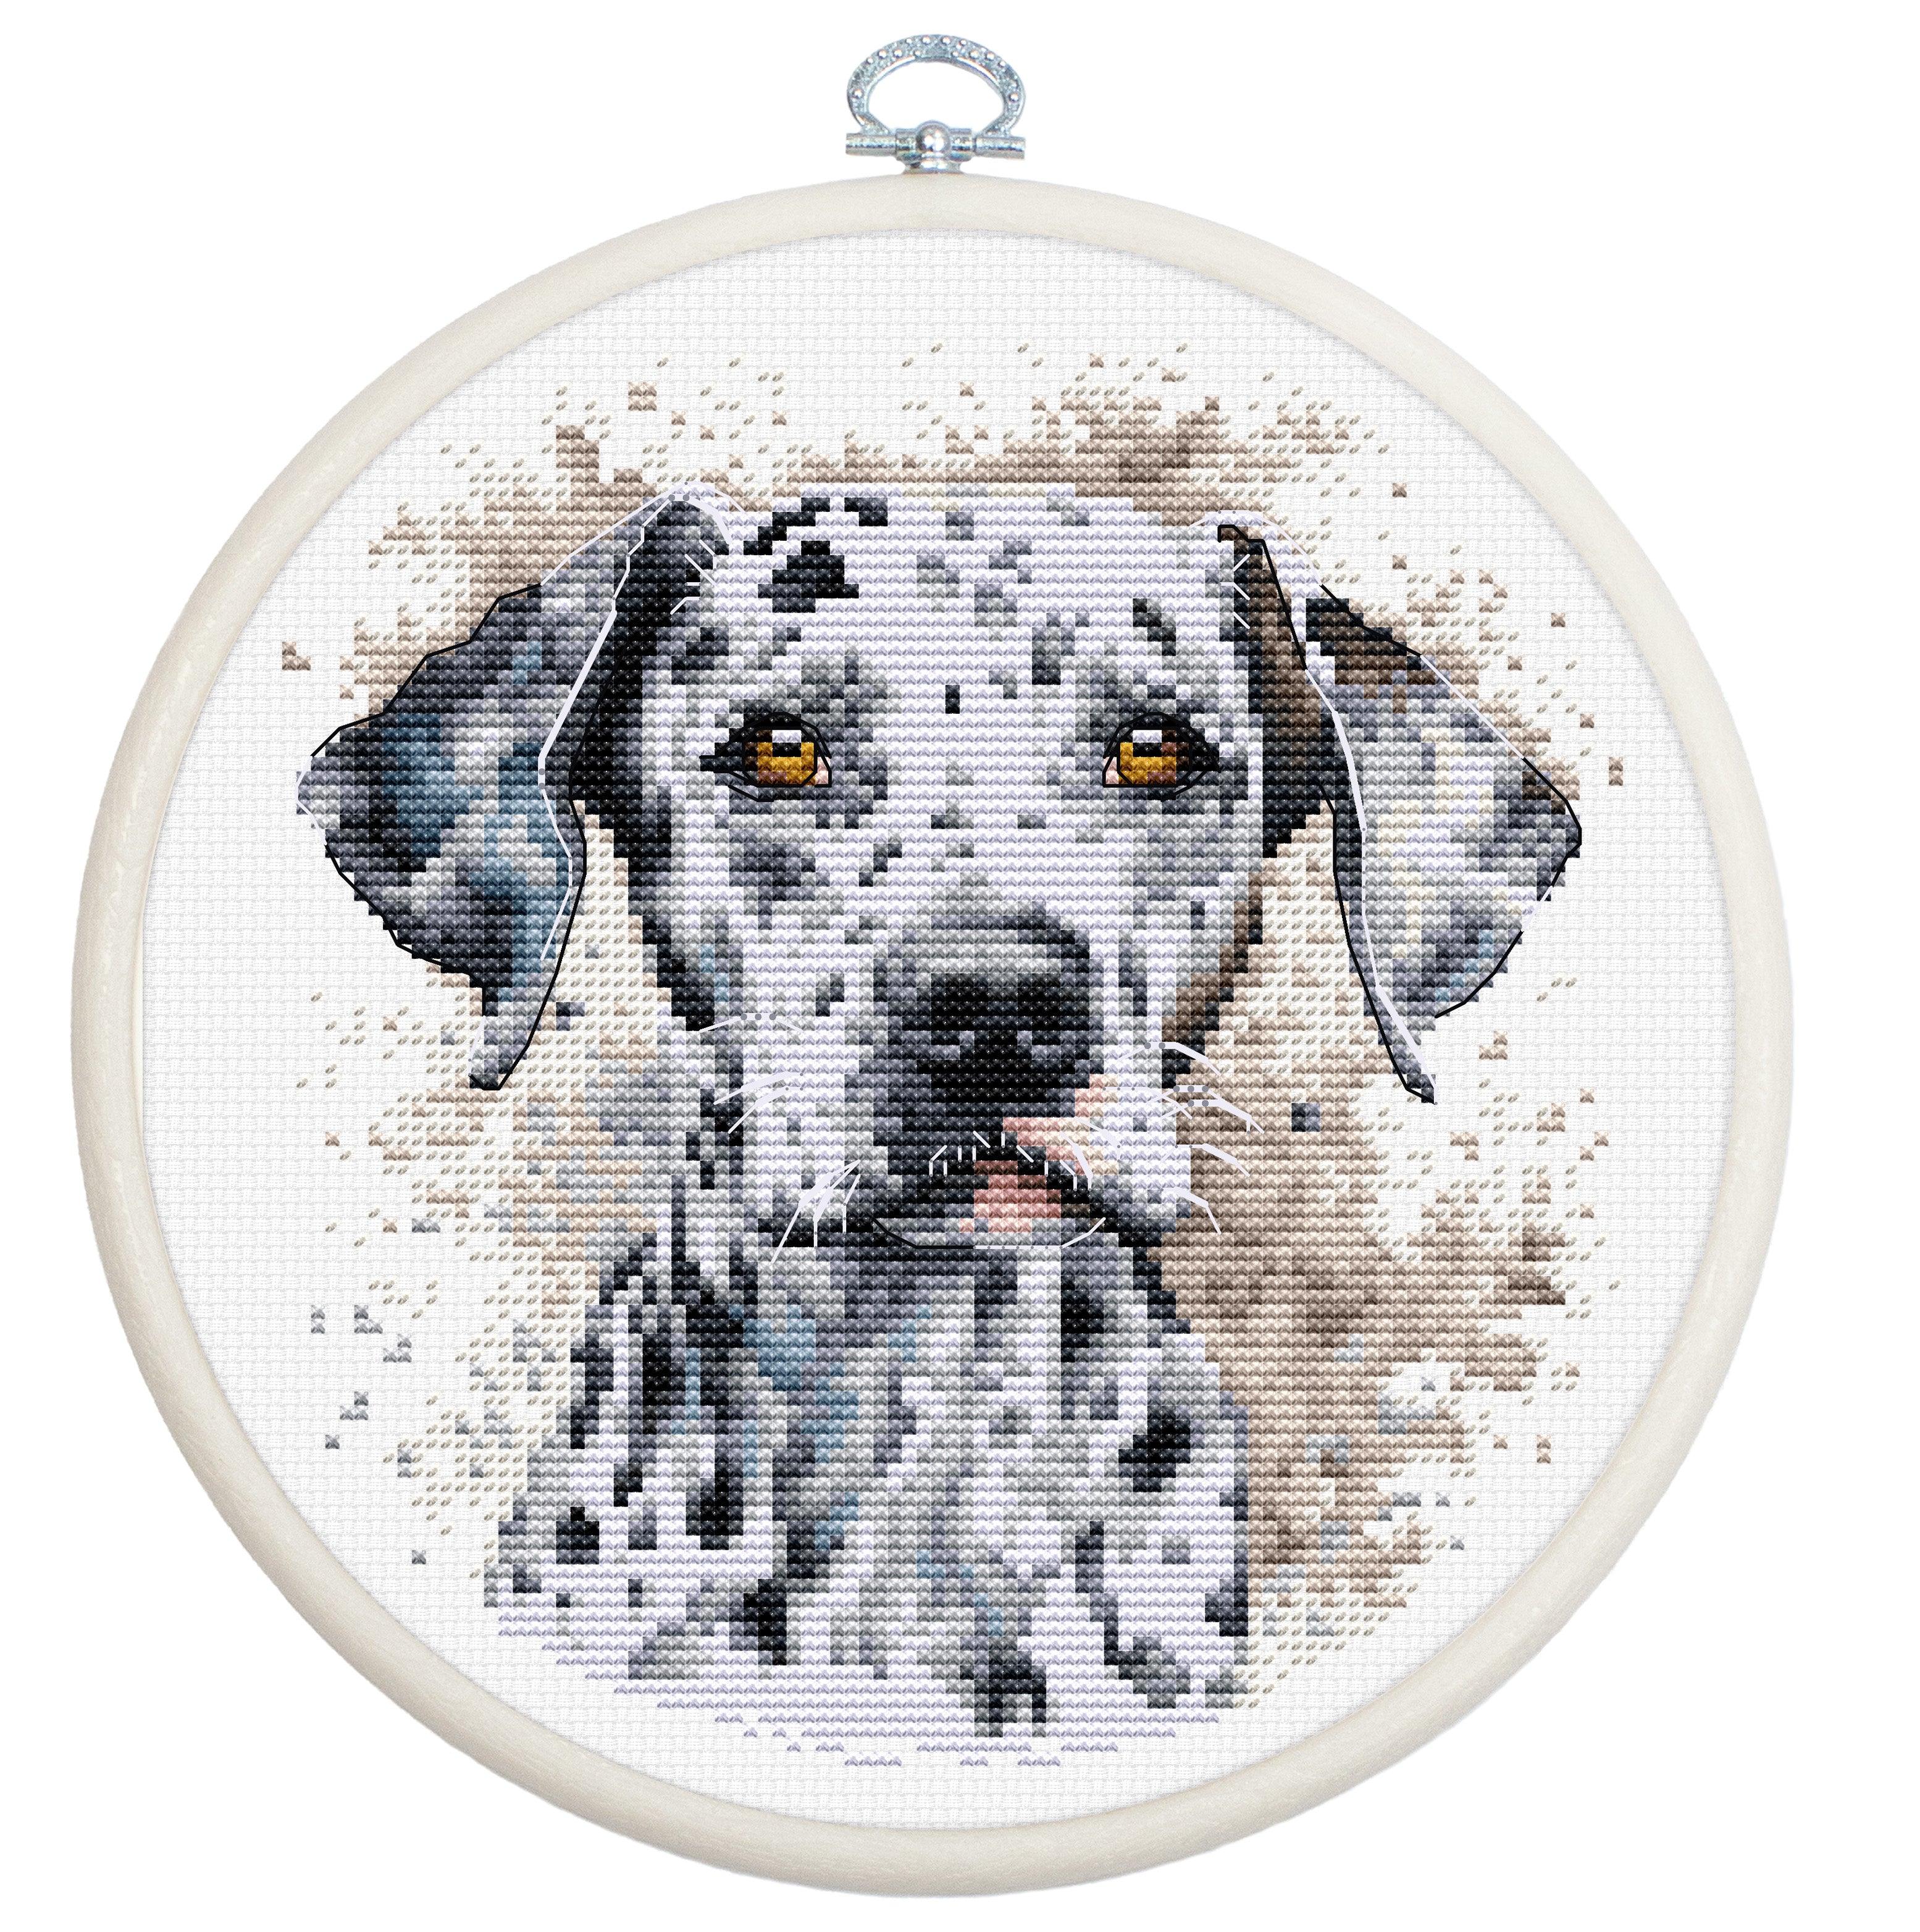 Cross Stitch Kit with Hoop Included Luca-S - The Dalmatian, BC208 - Luca-S Cross Stitch Kits